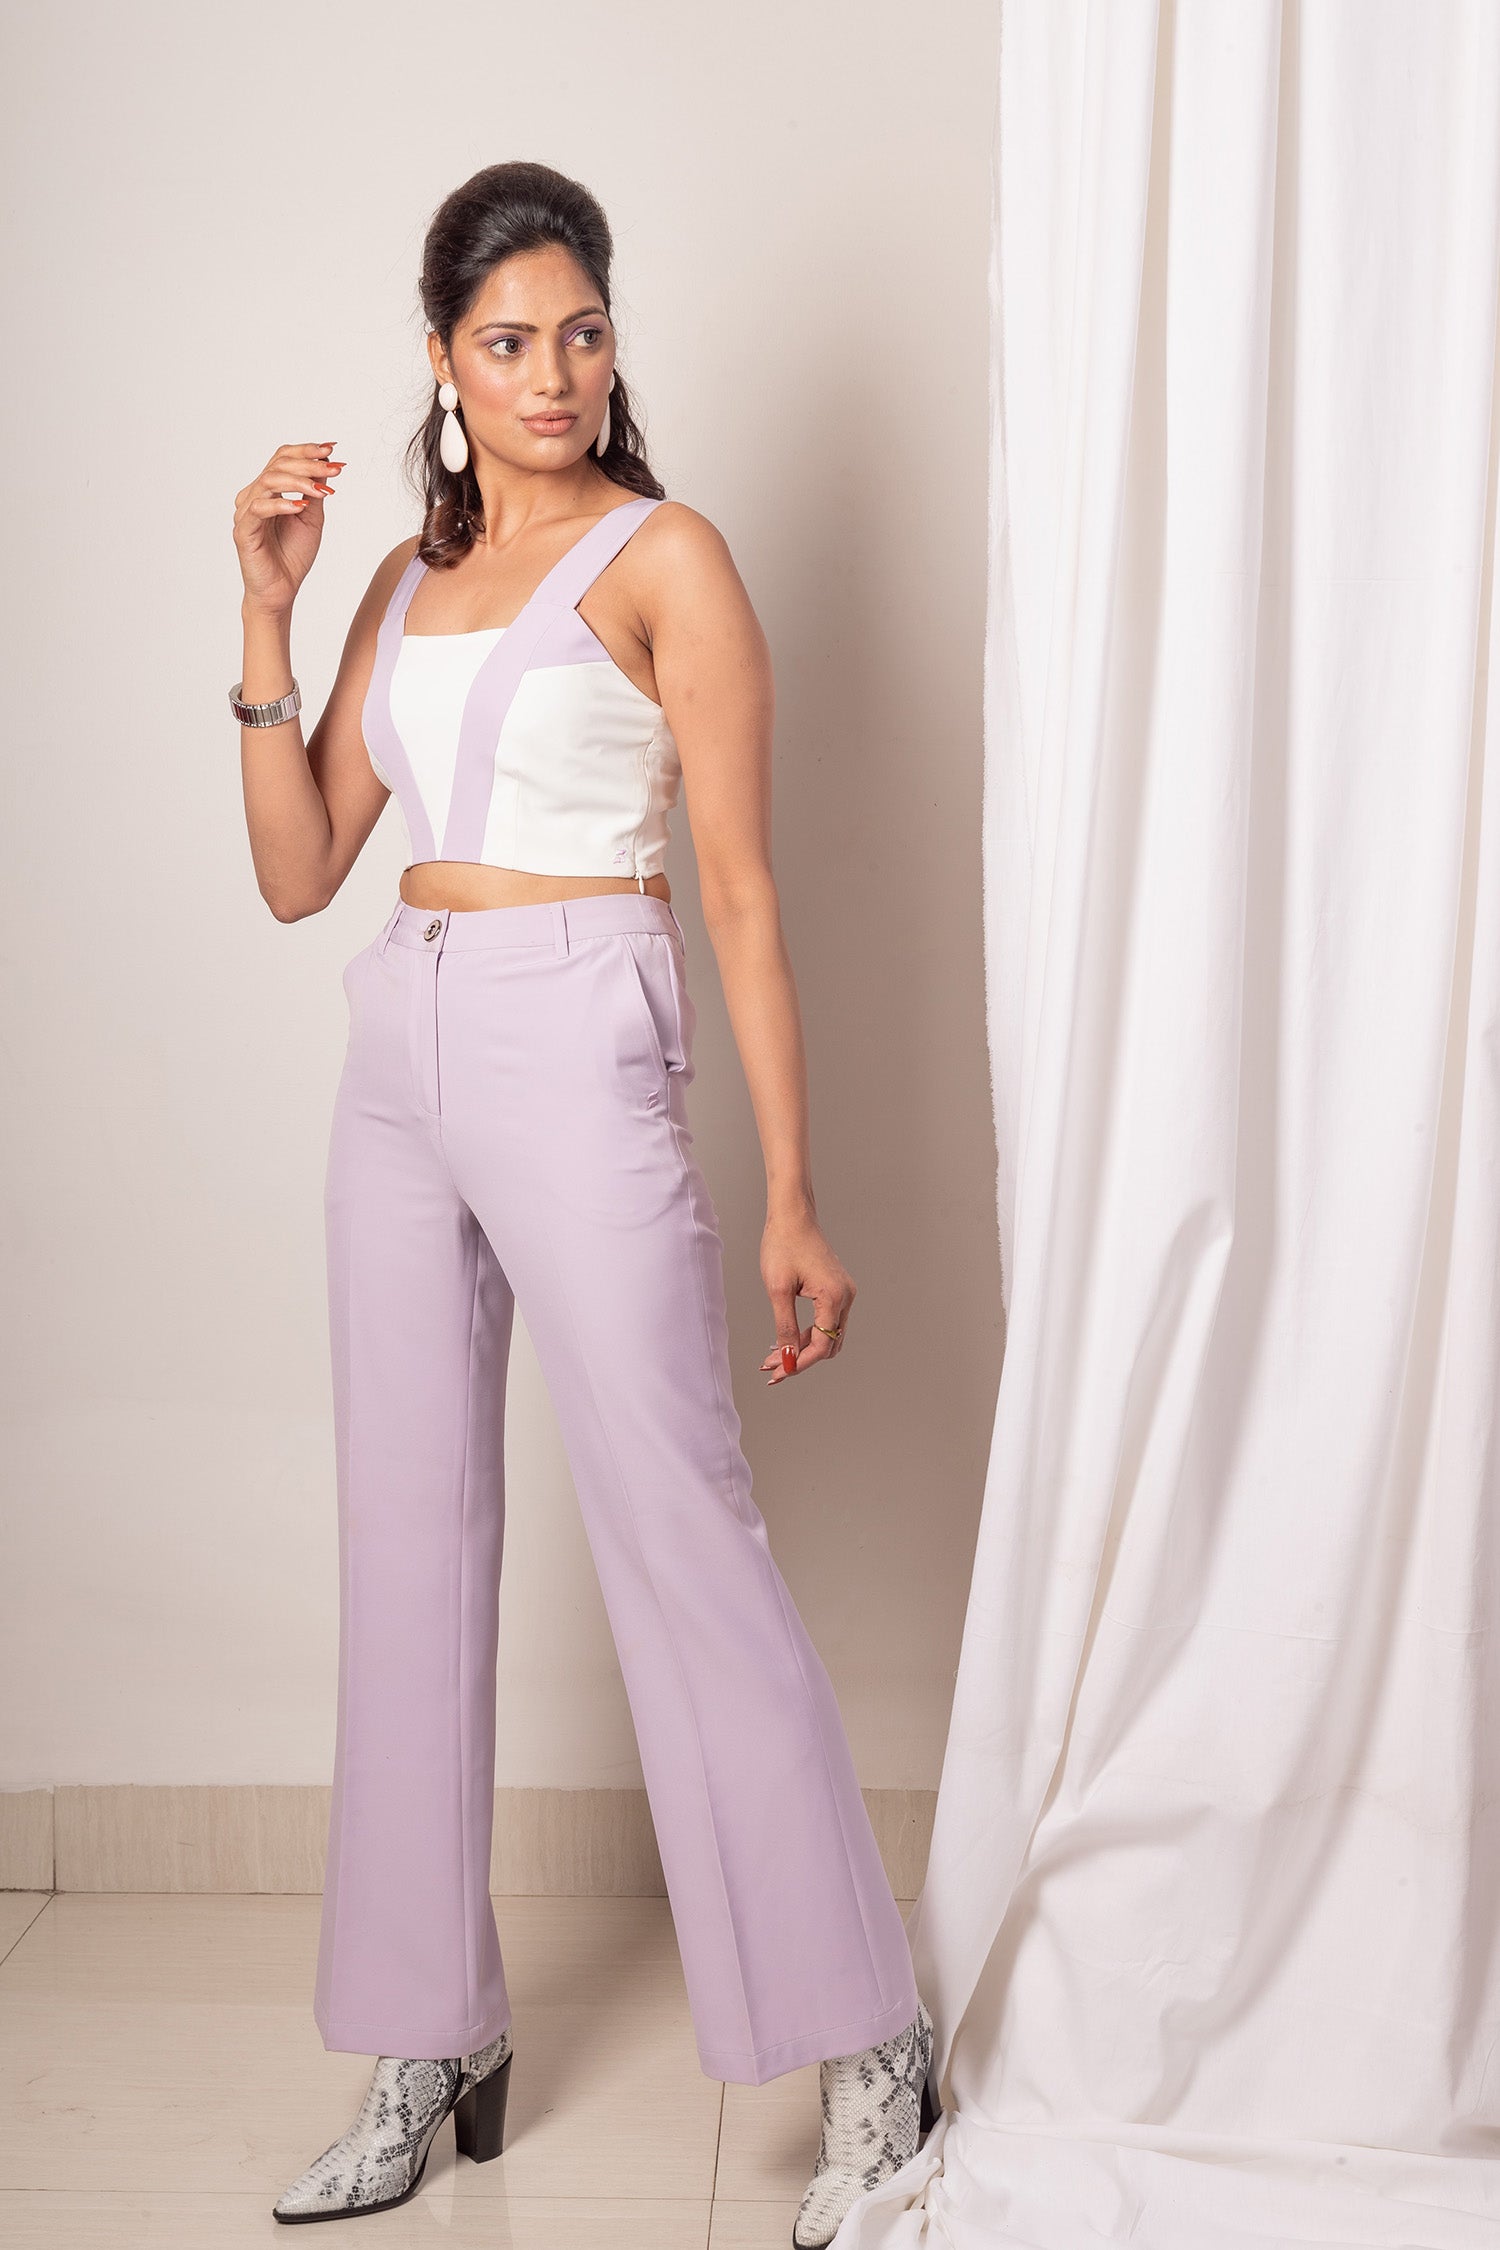 French Lilac-Romance Crop Top